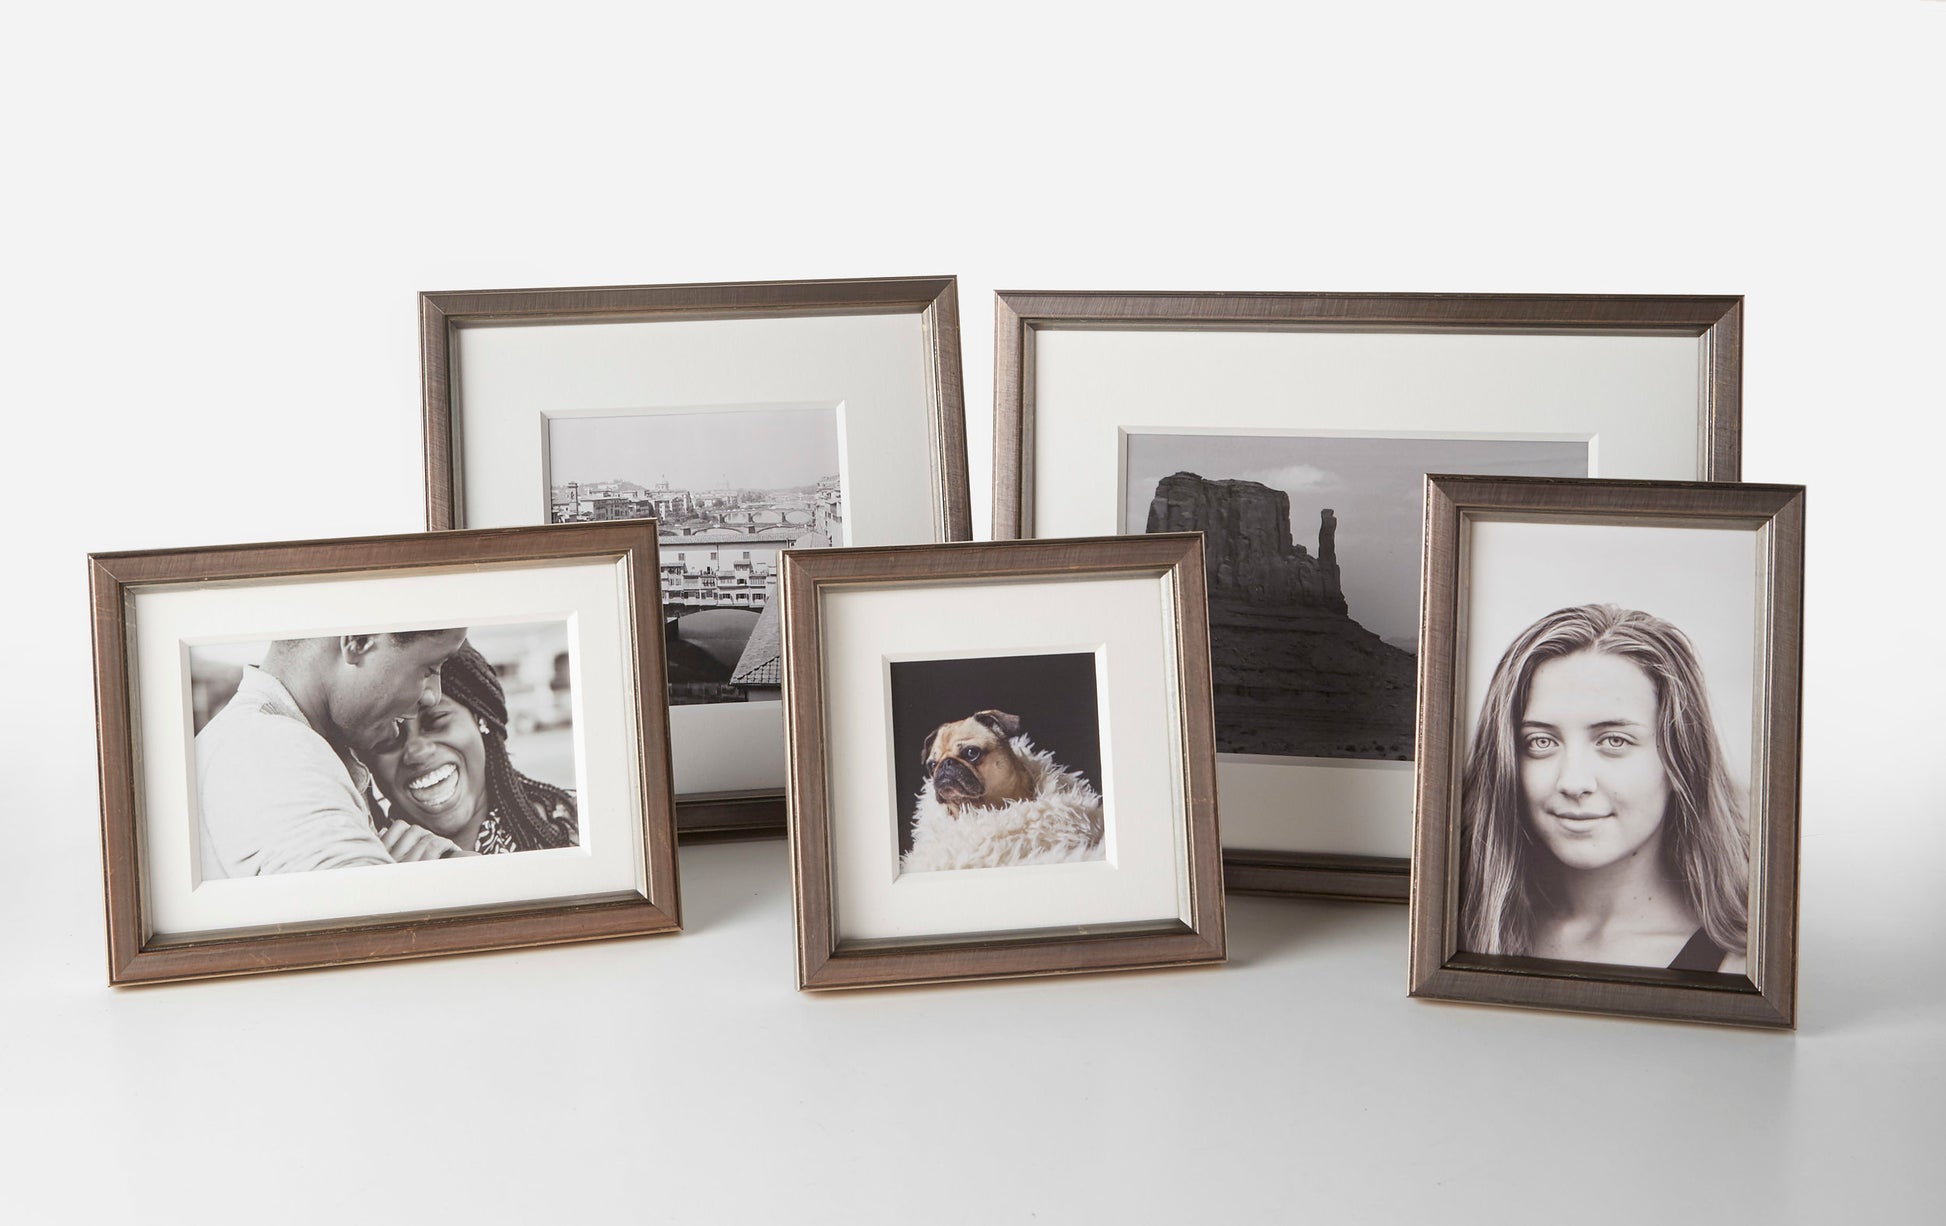 Grouped Brancui Piombo pewter-colored frames in a variety of sizes on a plain background